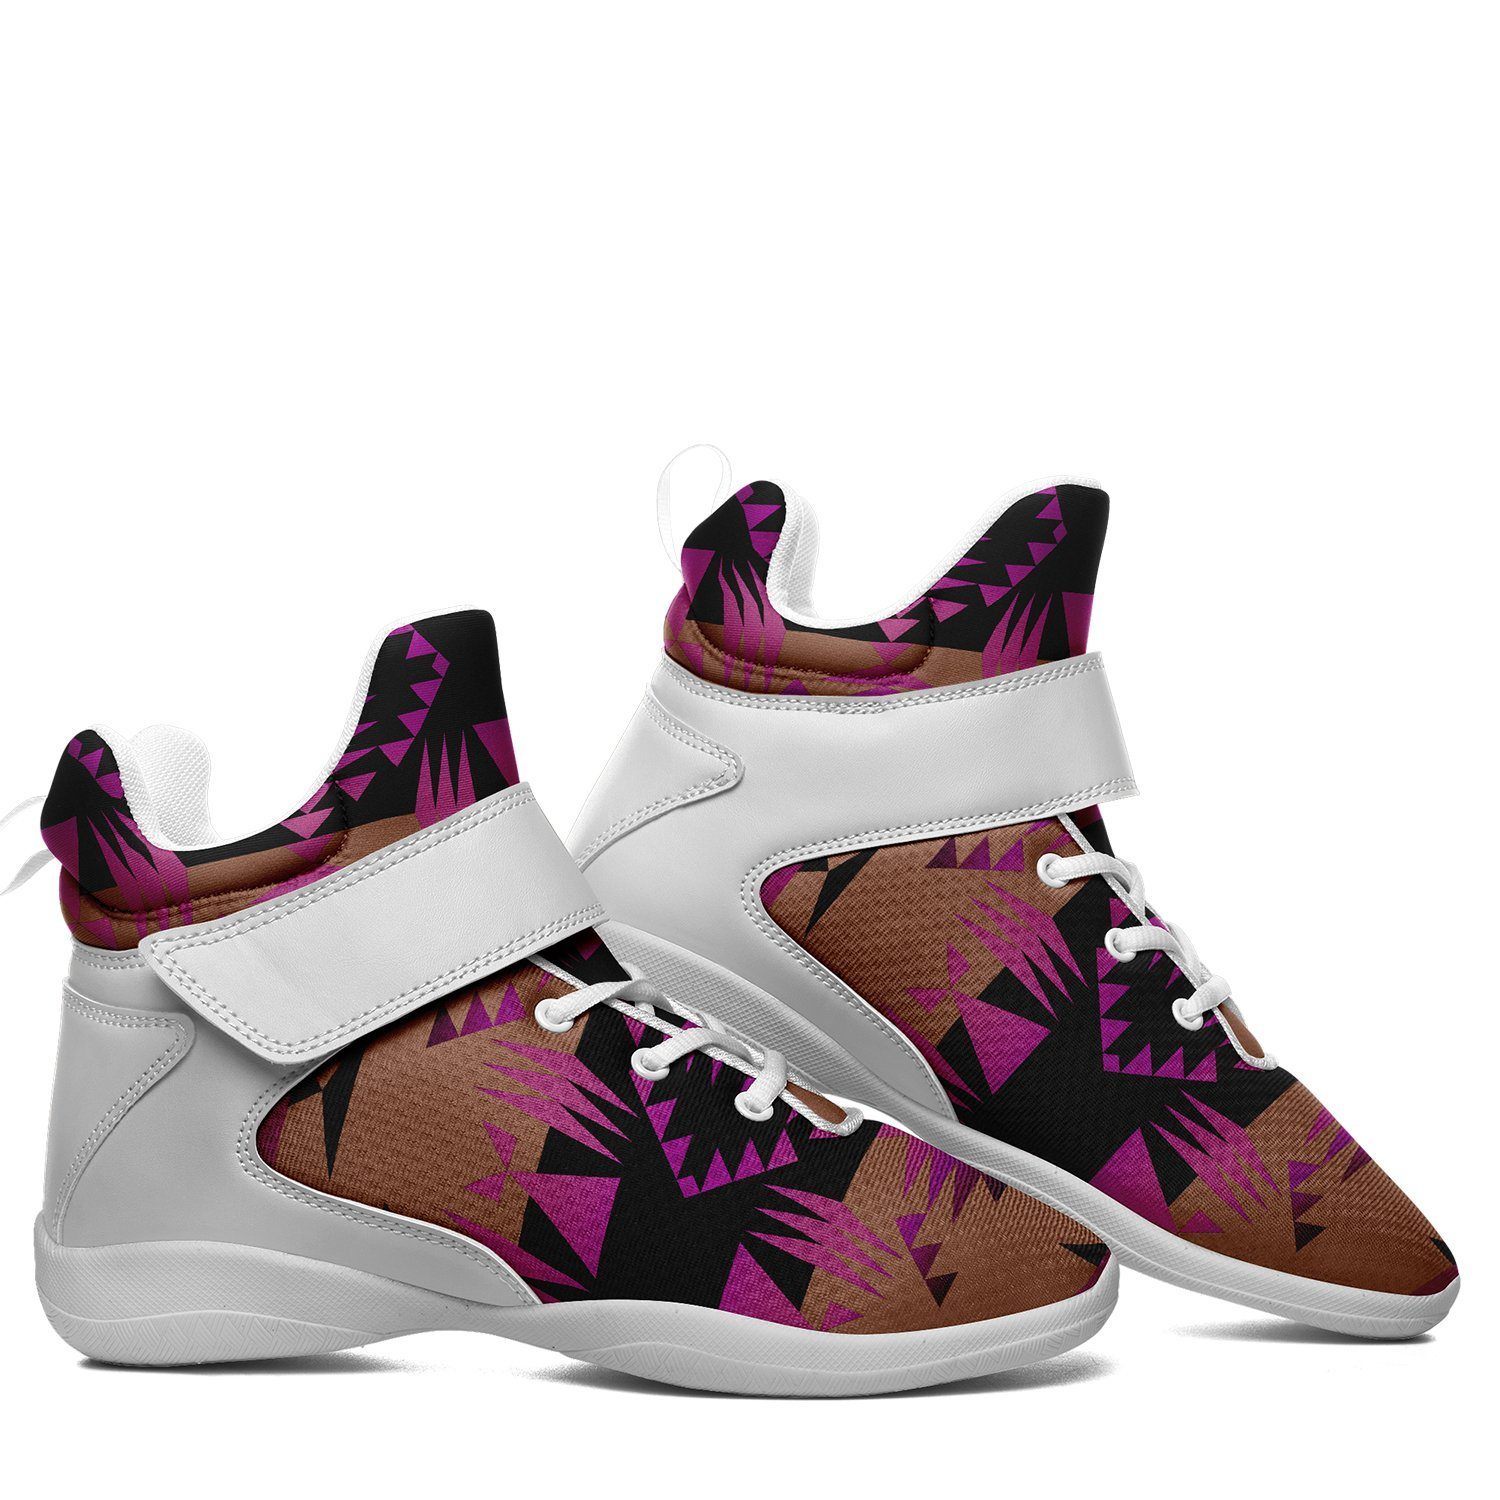 Between the Mountains Berry Ipottaa Basketball / Sport High Top Shoes - White Sole 49 Dzine 